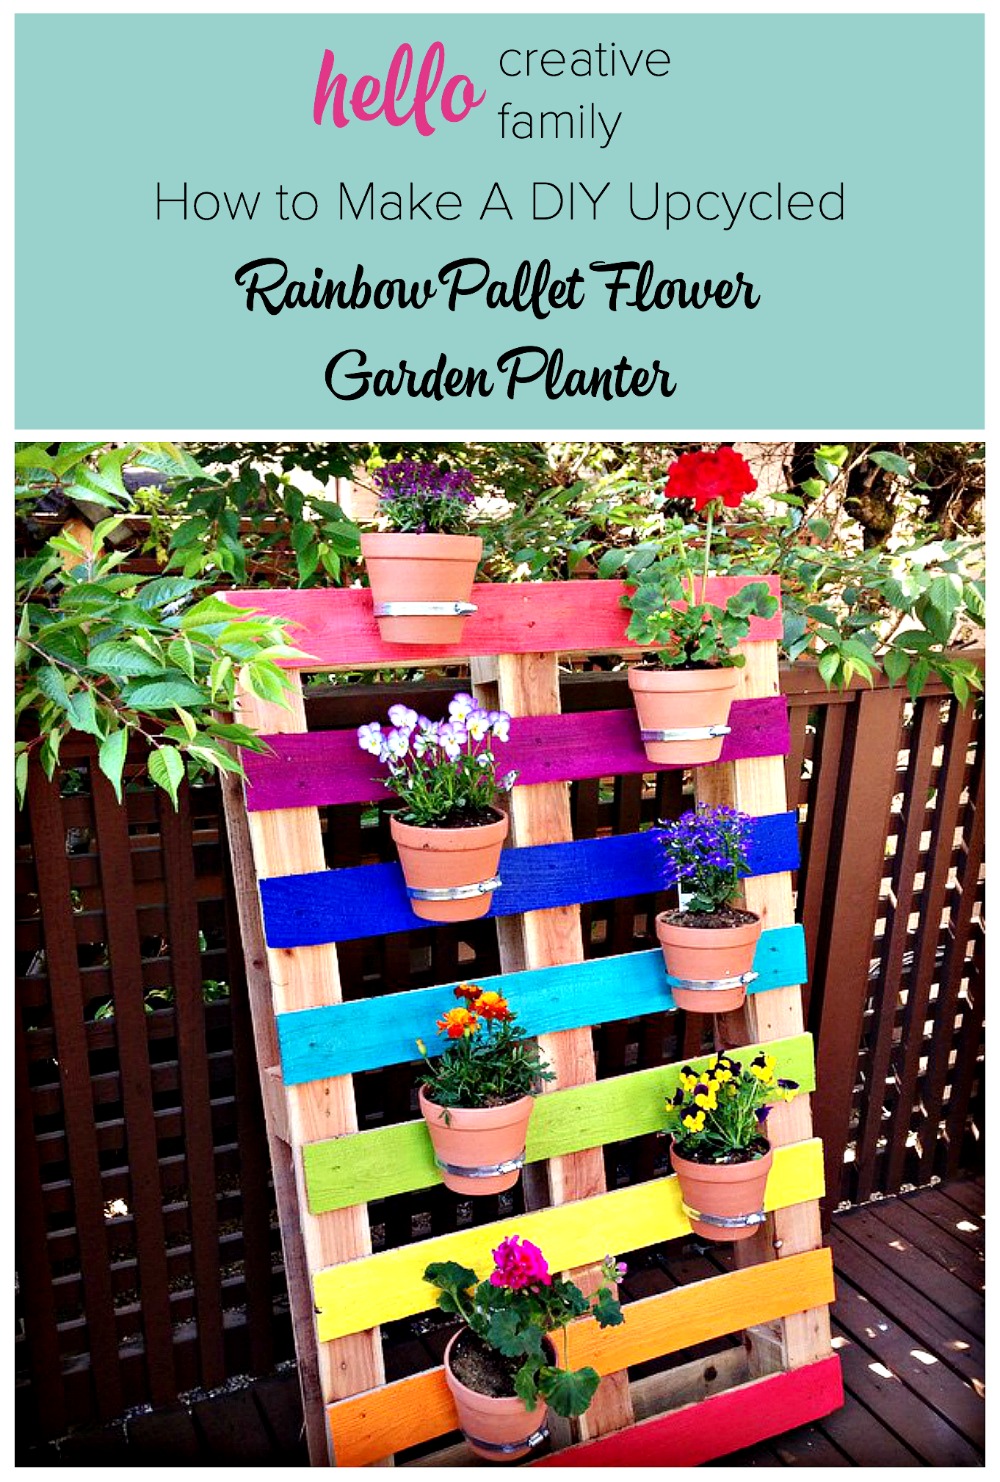 diy pallet garden flower planter rainbow projects upcycled crafts family planters make gardening creative project weekend colorful craft pallets upcycling